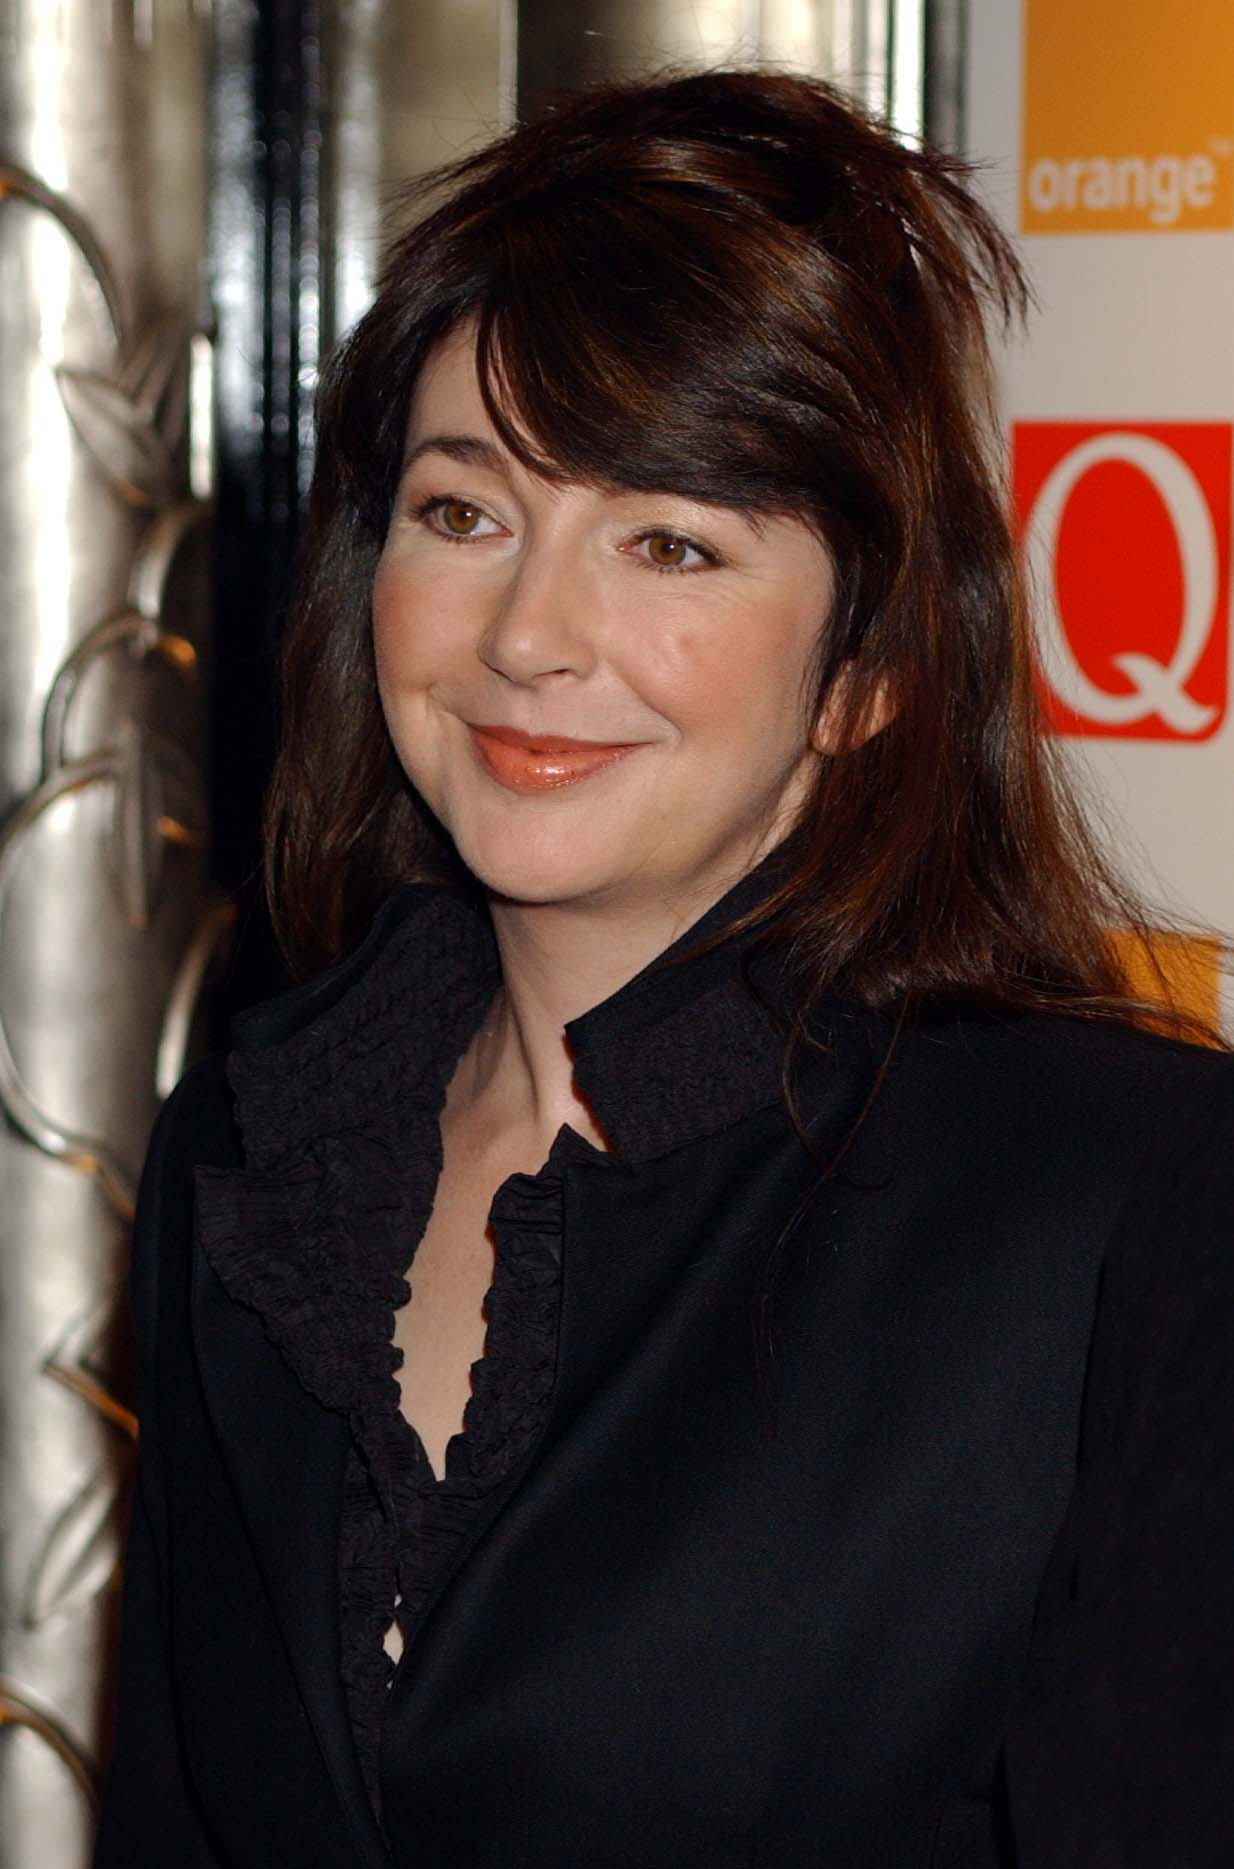 Singer Kate Bush arrives at the Park Lane Hotel, Mayfair London for the 2001 'Q' Magazine annual music awards | Photo: Getty Images